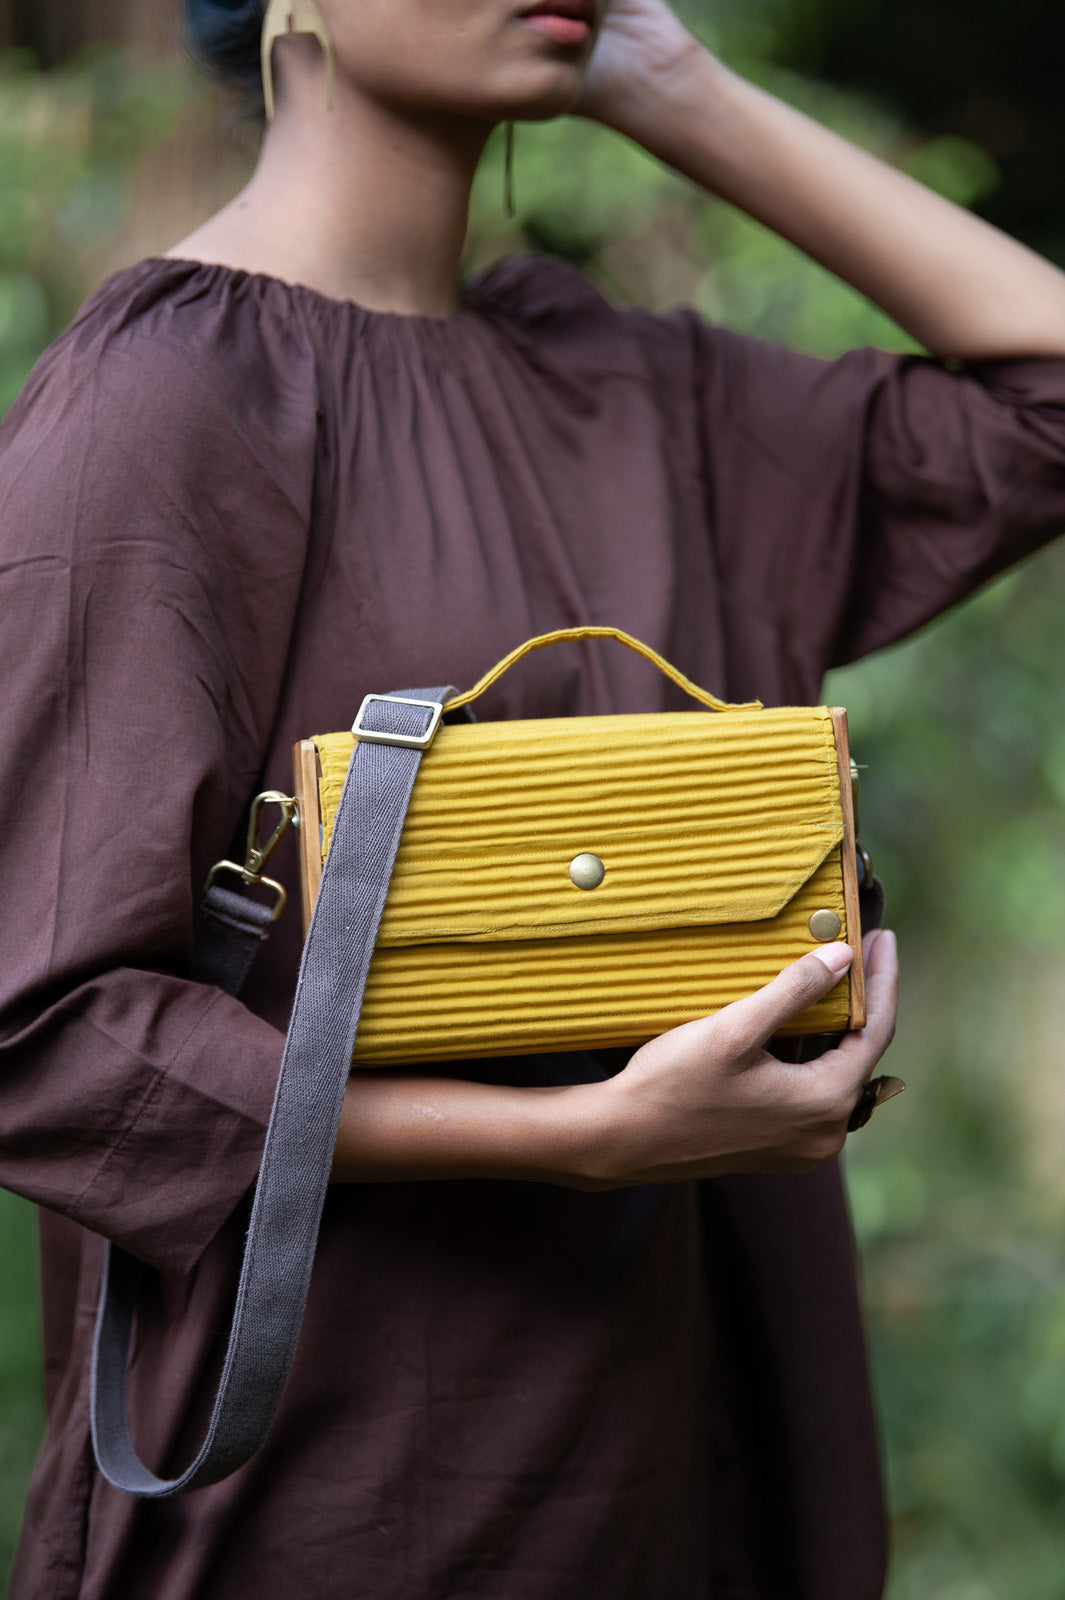 100% handcrafted box clutch comes with a detachable sleeve in a solid yellow shade.